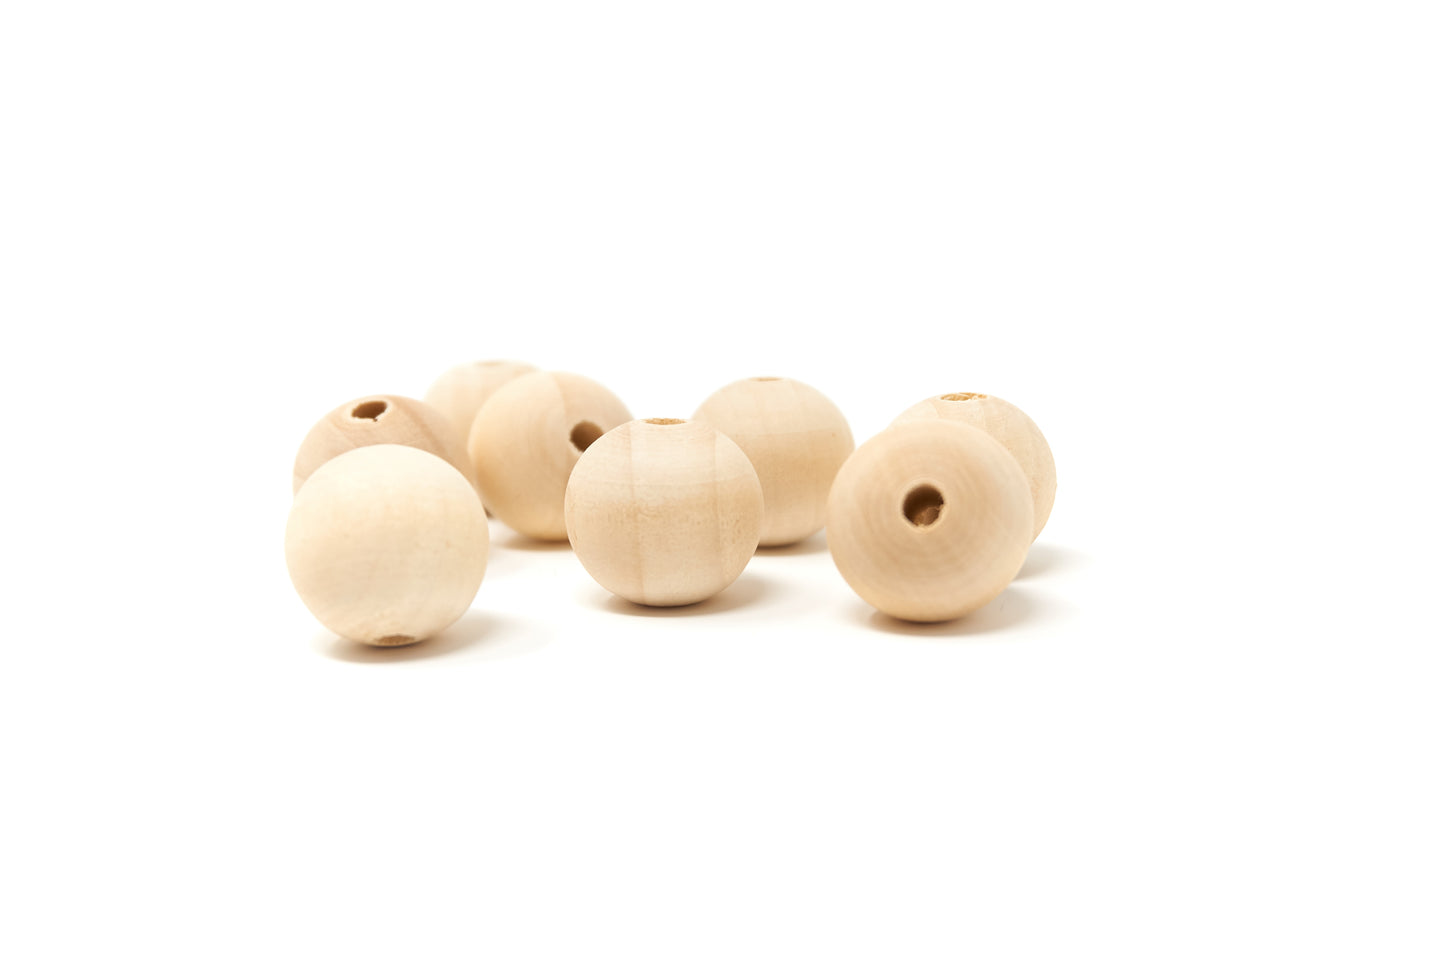 Natural Round Wood Beads 20mm 10 pieces - Cameos Art Shop